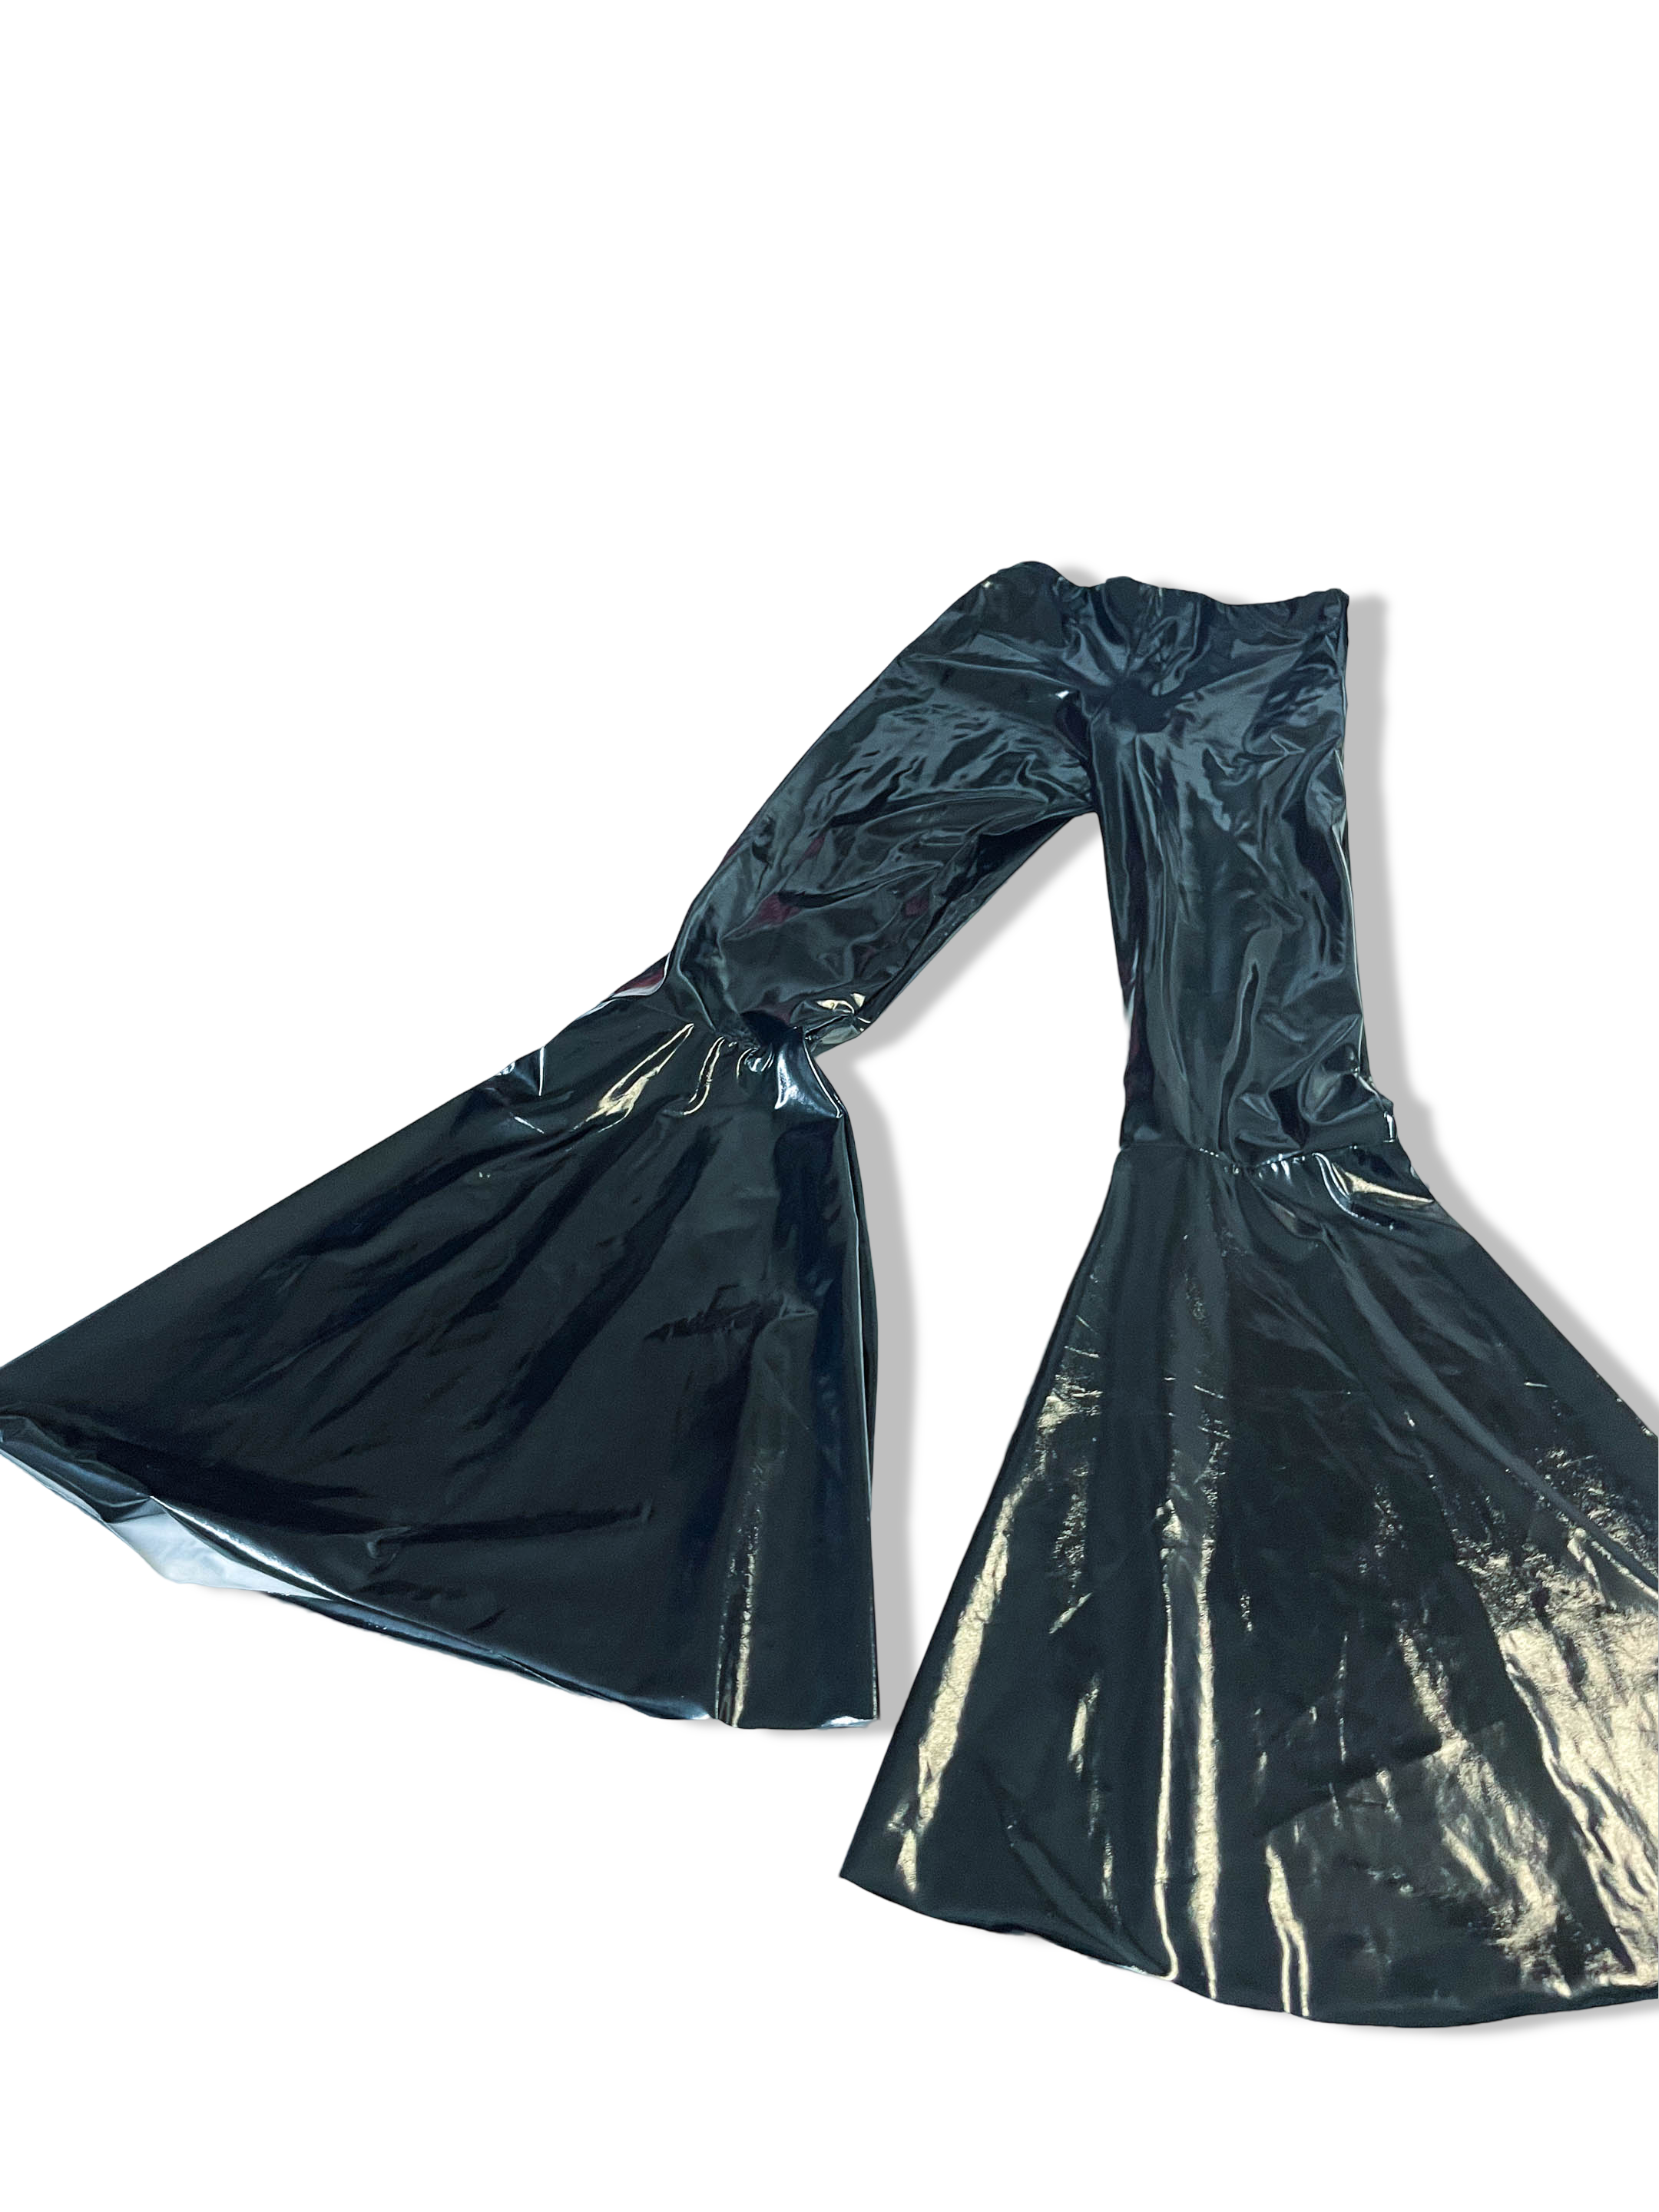 Black women's glossy flare Polyester pant size 6 made in UK with new tag|L30 W22|SKU 4012